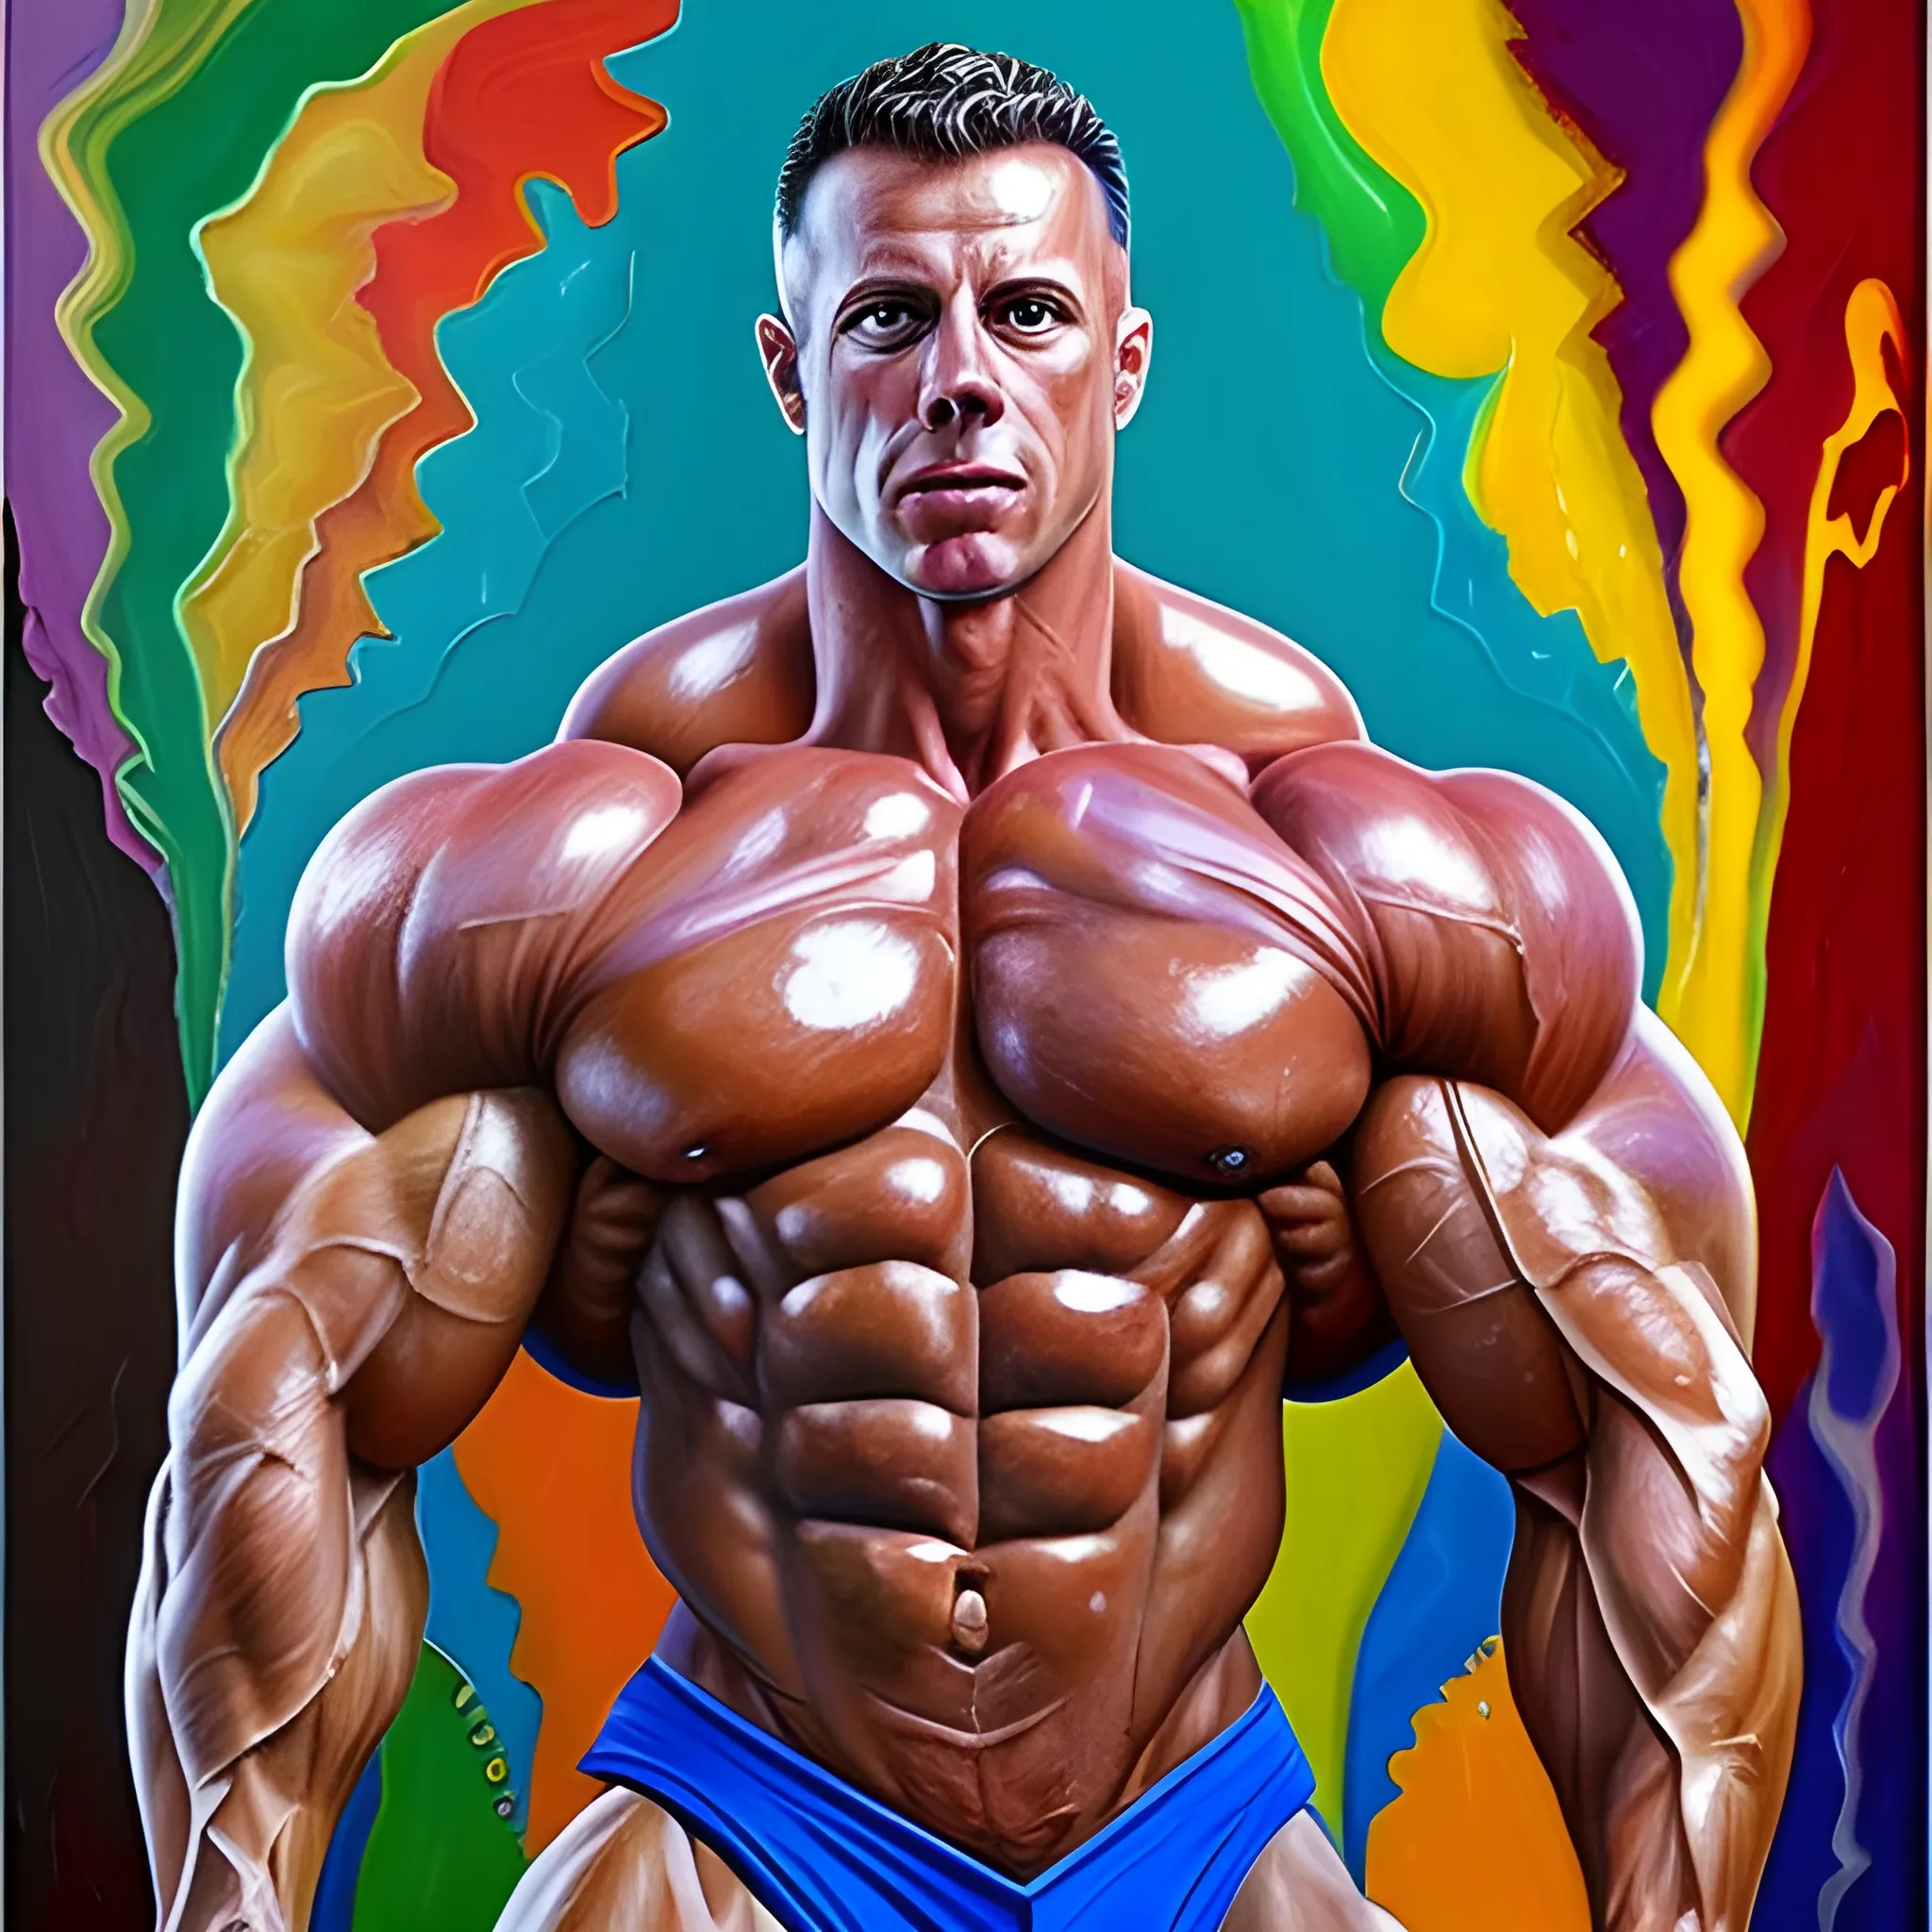 , Oil Painting, Trippy
MUSCLE BODYBUILDER MORPHED